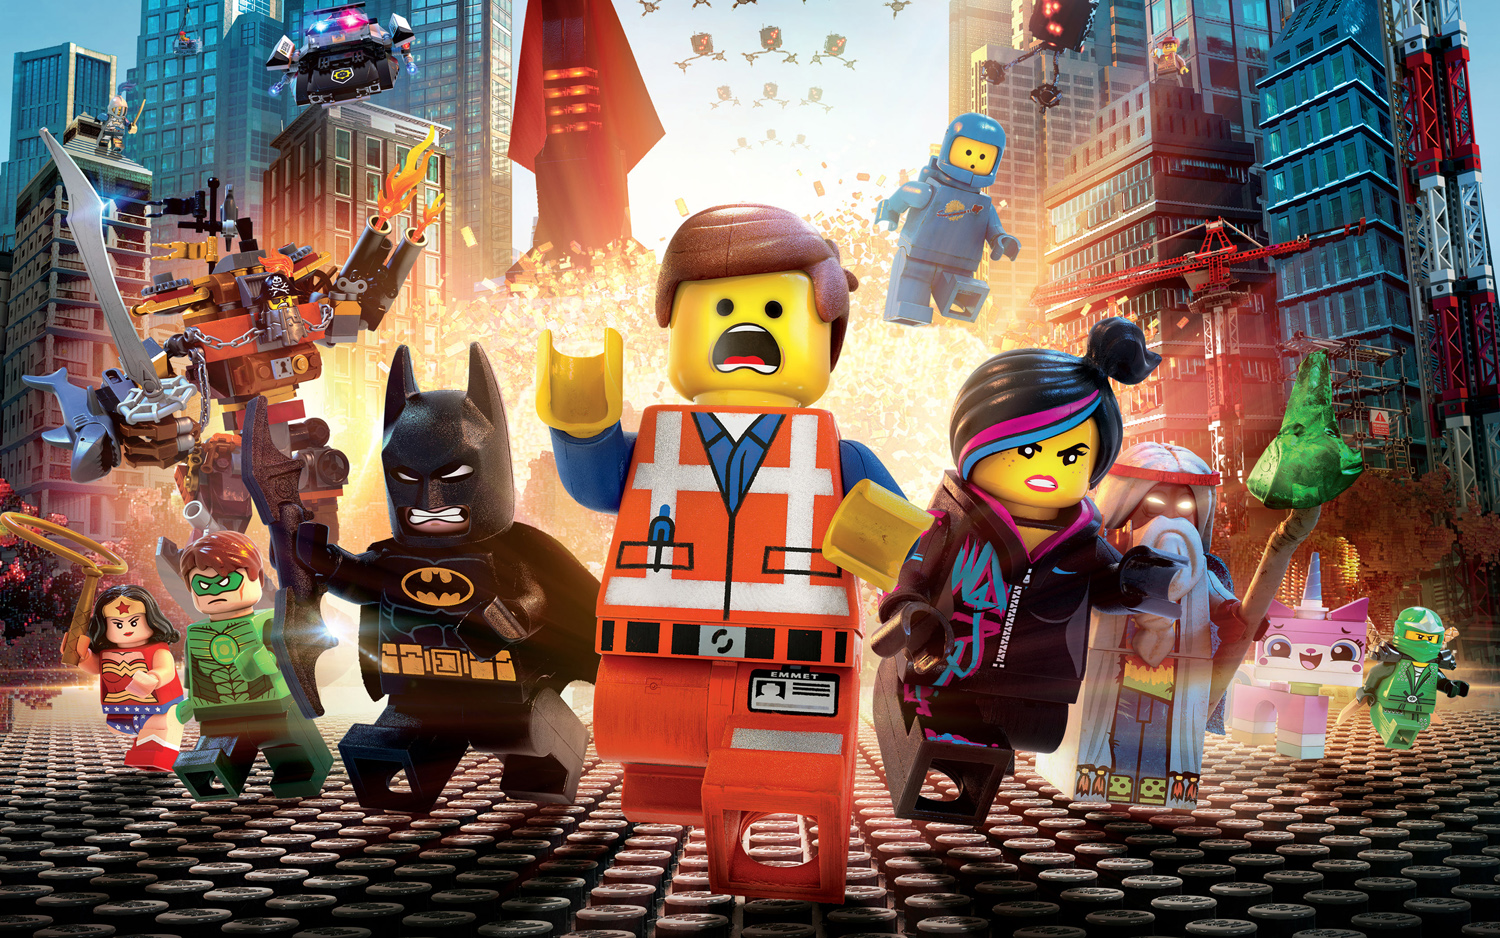 Warner Brothers' The Lego Movie explodes onto screen.